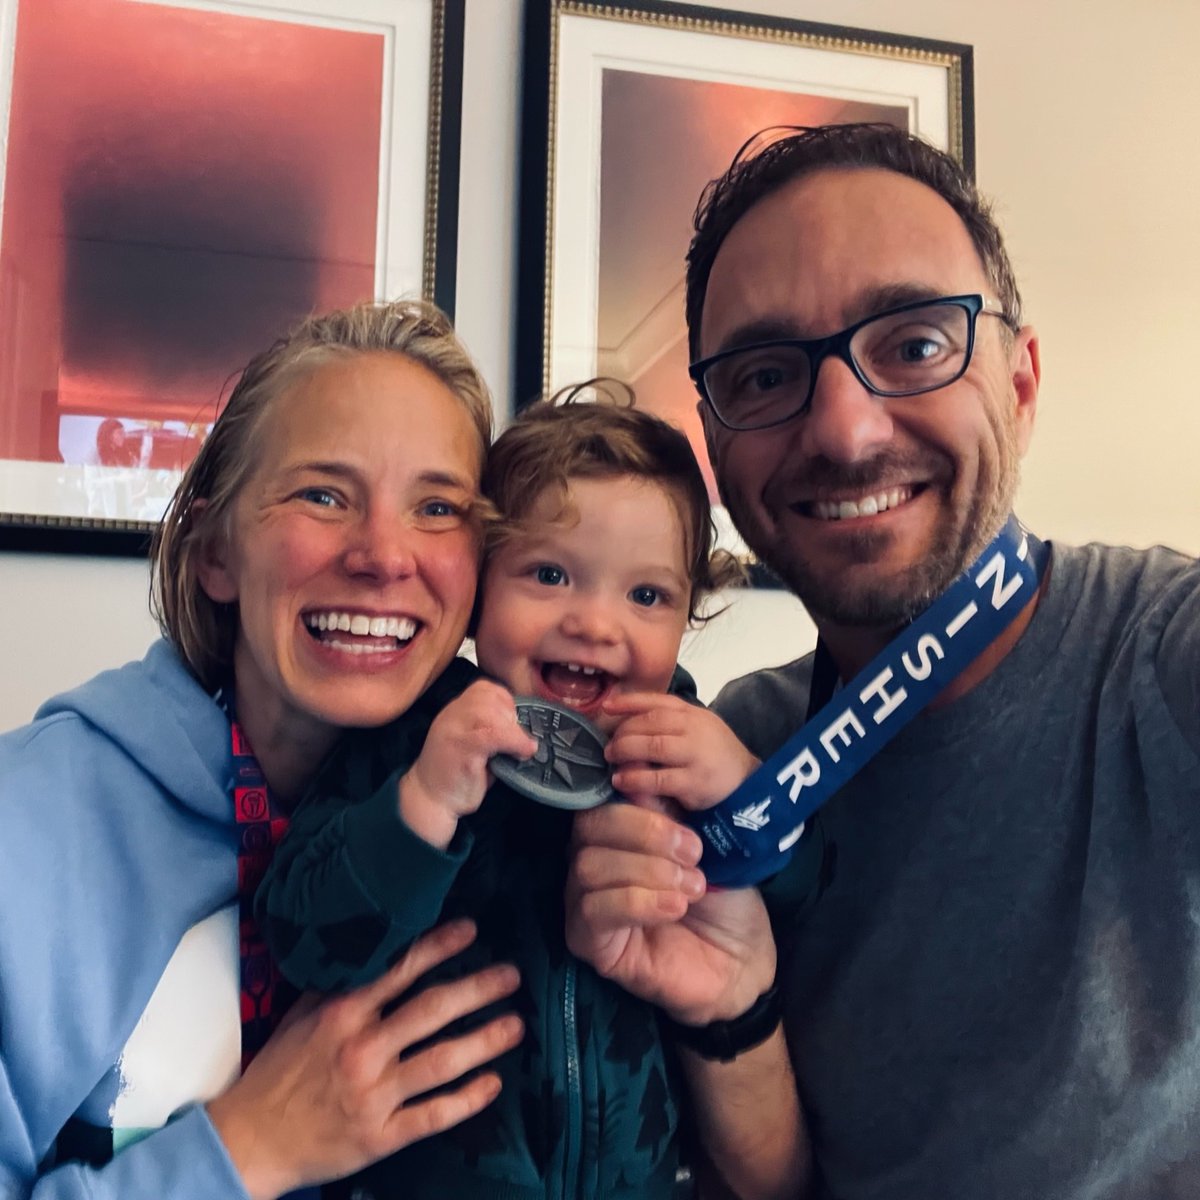 My favorite fall weekend is the @ChiMarathon! My wonderful husband @NicholasAbruzzo & I started and finished together in 3 hr 50 min (my second fastest marathon). Our 11 month old son & much of our family cheered us on at mile 14! What a fun and memorable weekend 🥰